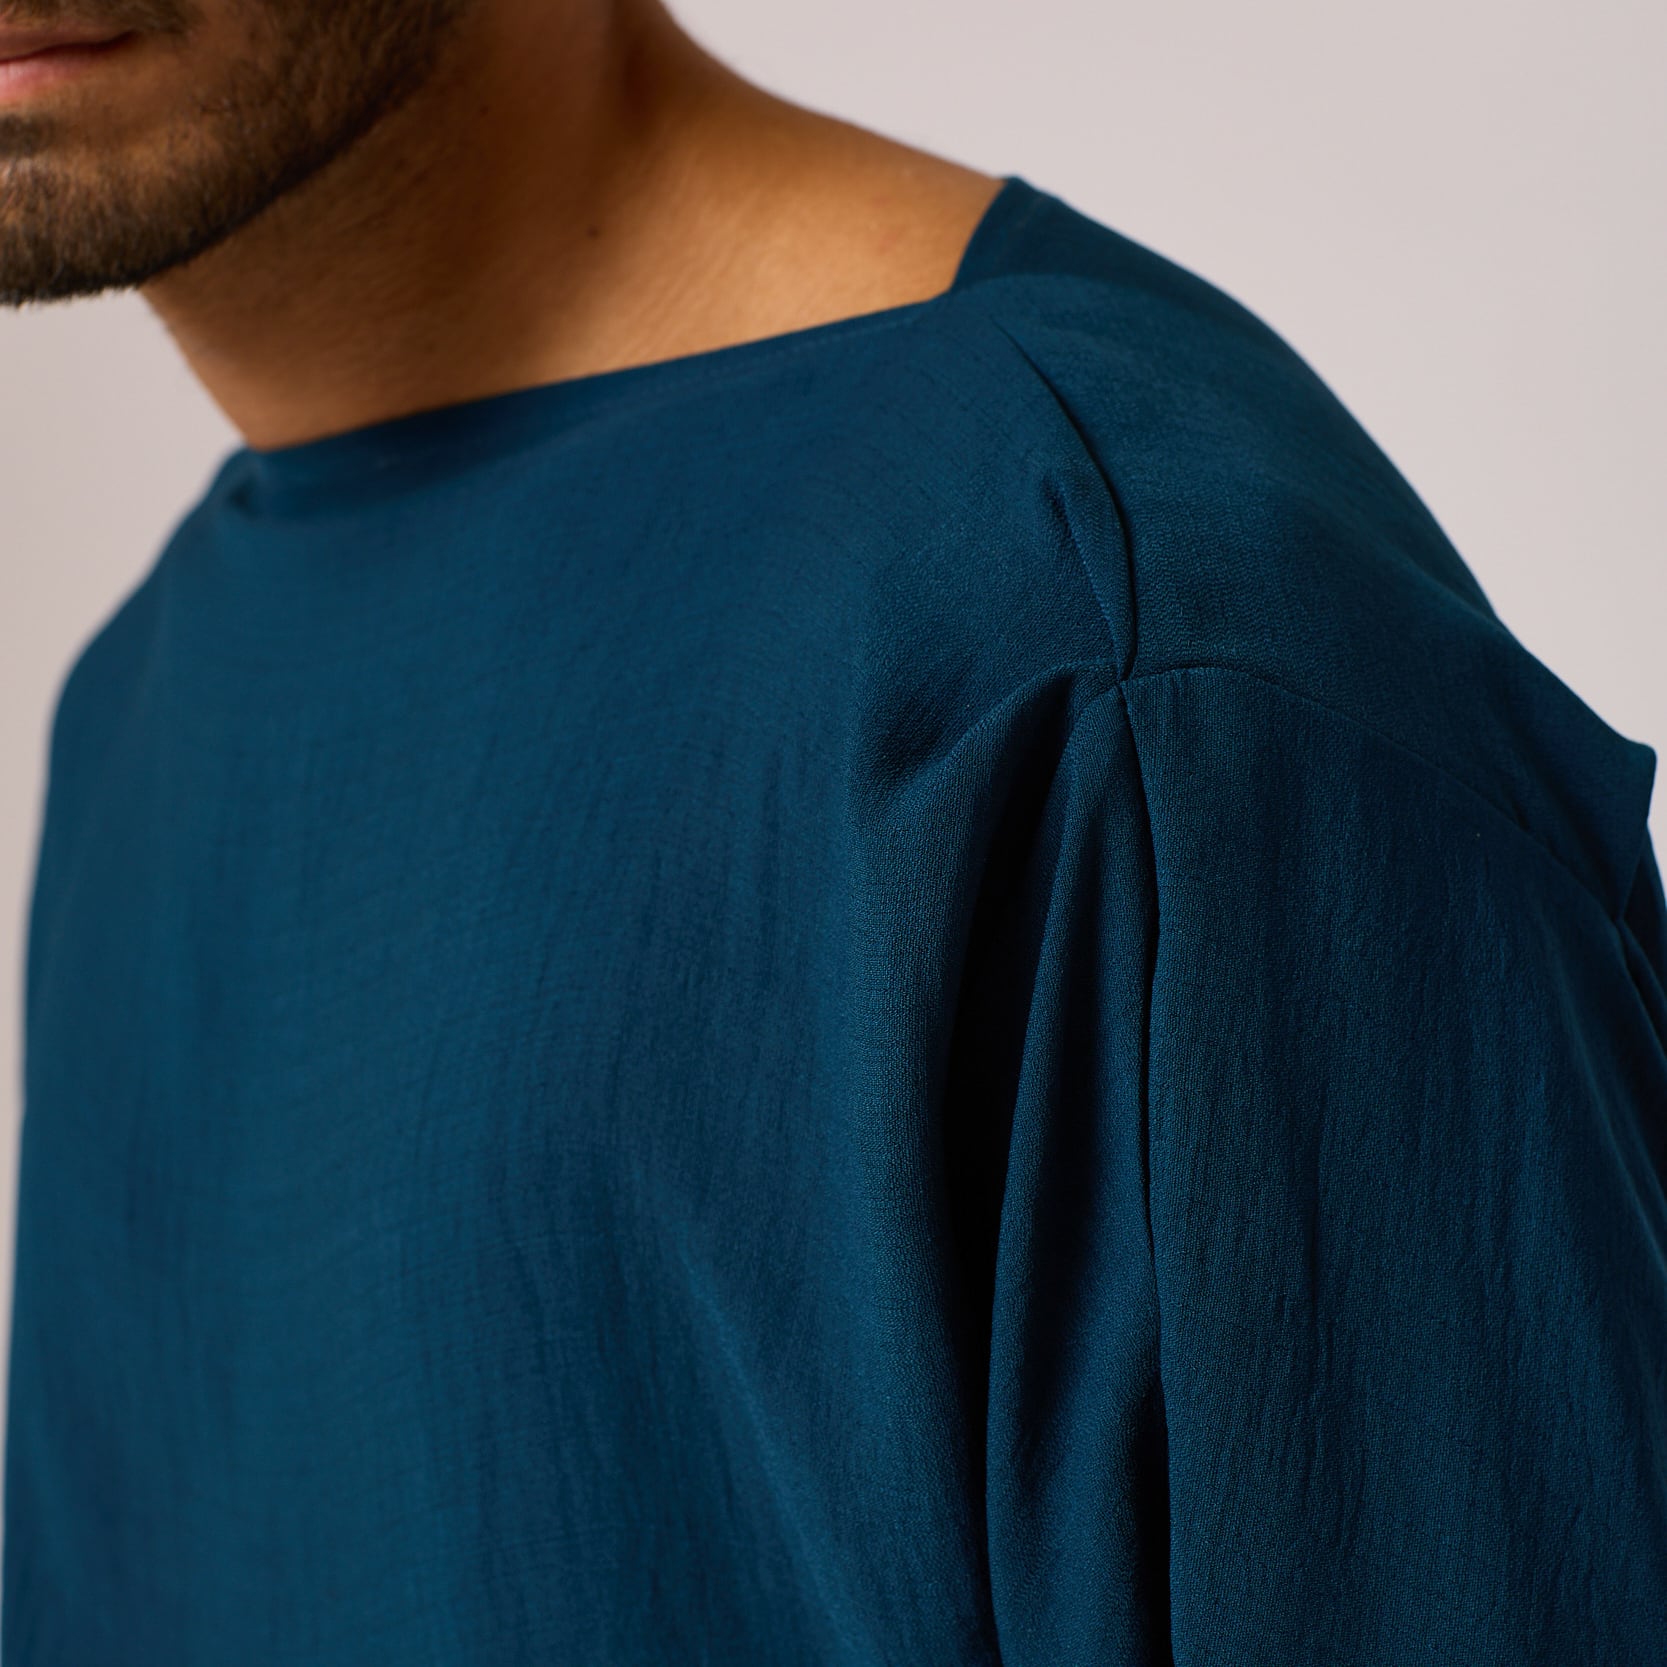 ZERØ London - Close up, mens zero waste long sleeve high/low shirt with bateau neck in teal blue, designed & made in London